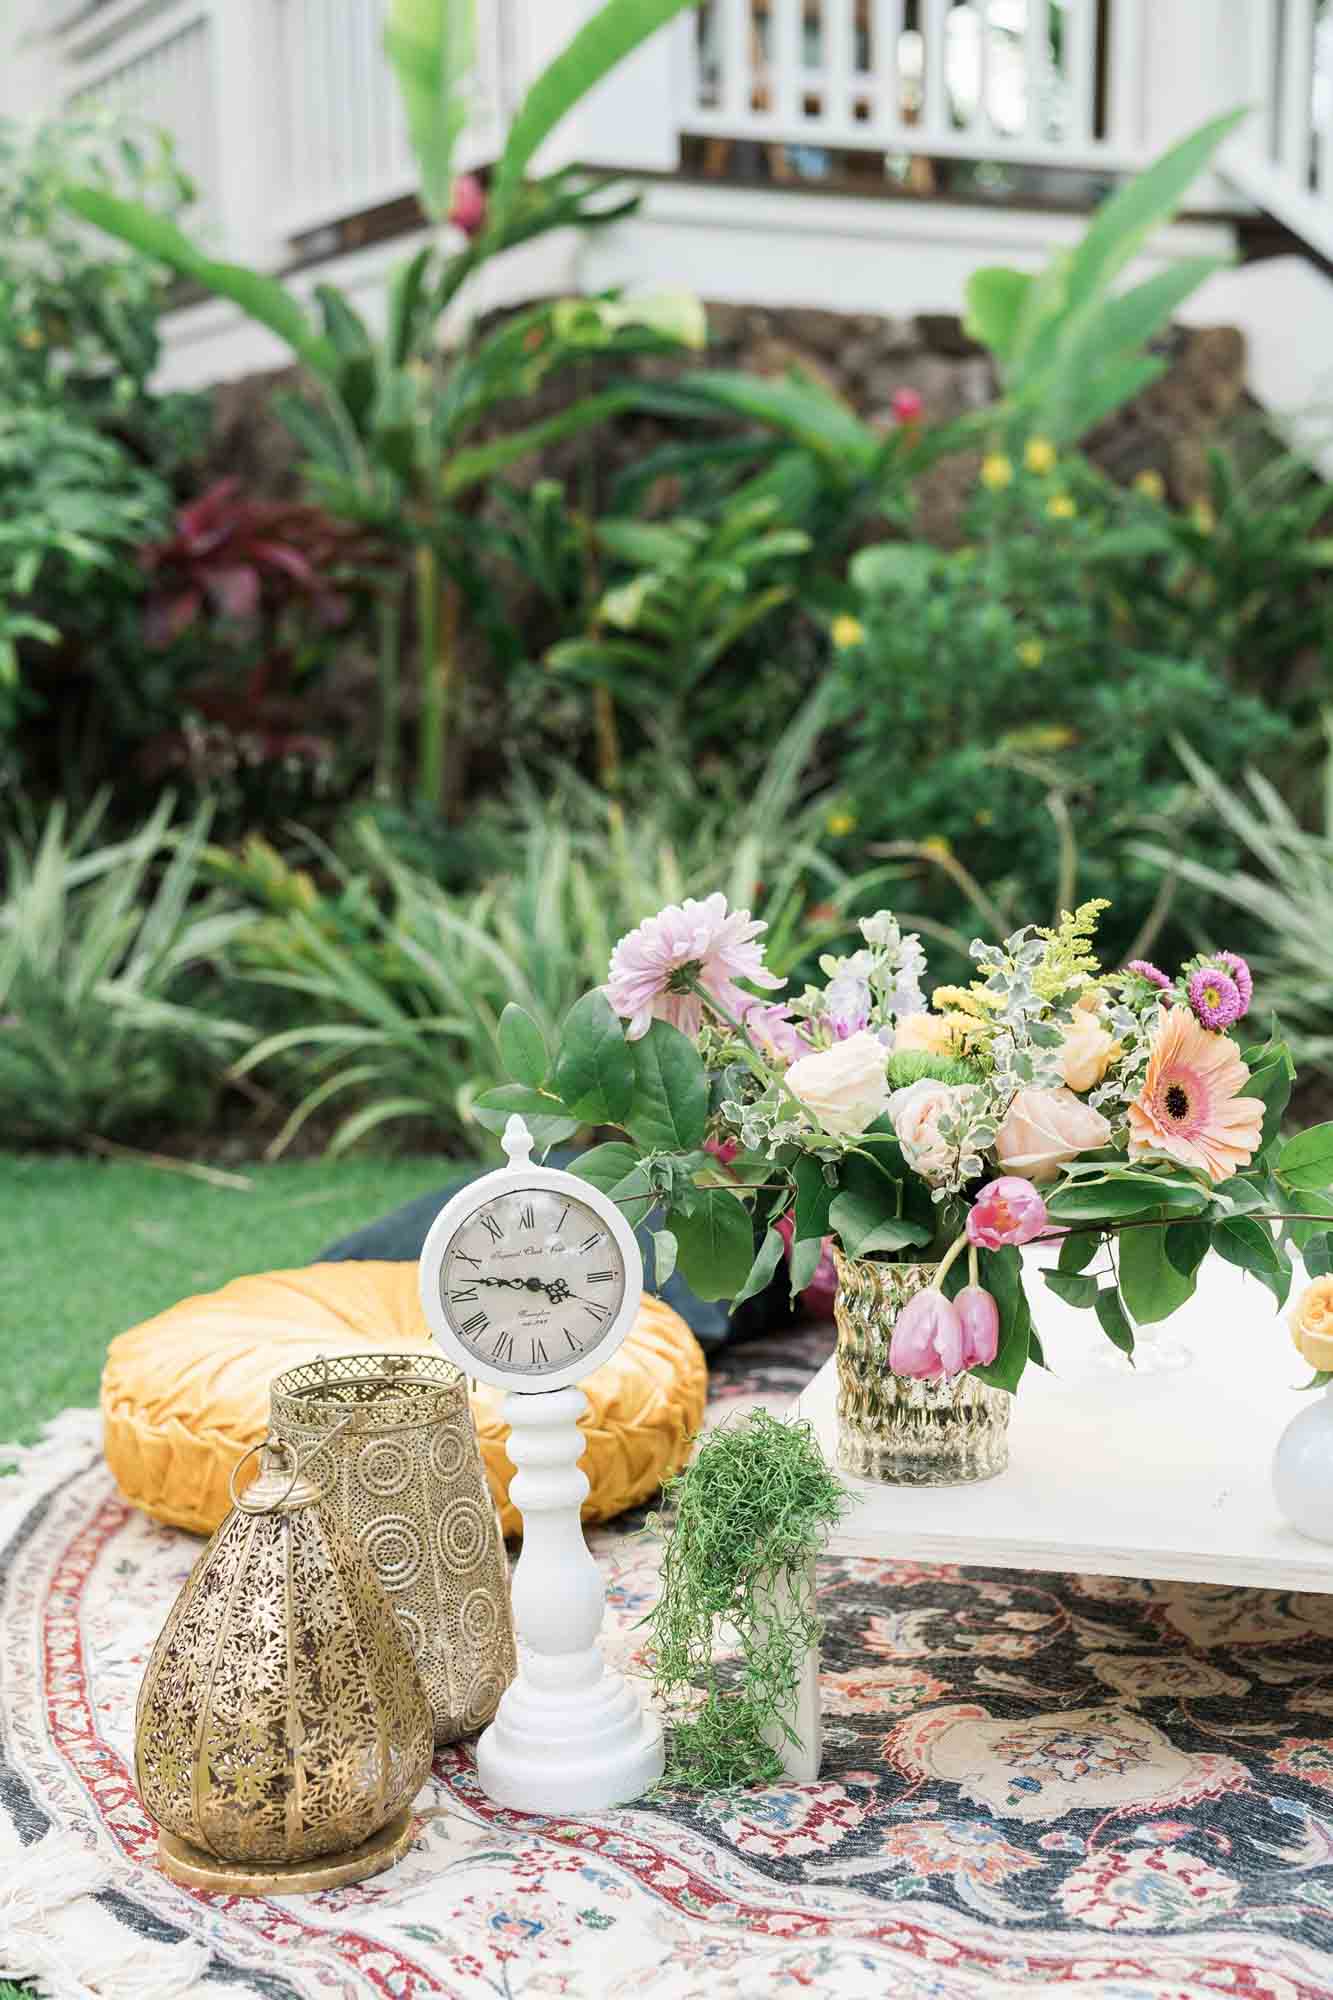 Wonderland-themed wedding inspiration in the gardens of O'ahu | Rae Marshall Photography | Featured on Equally Wed, the leading LGBTQ+ wedding magazine